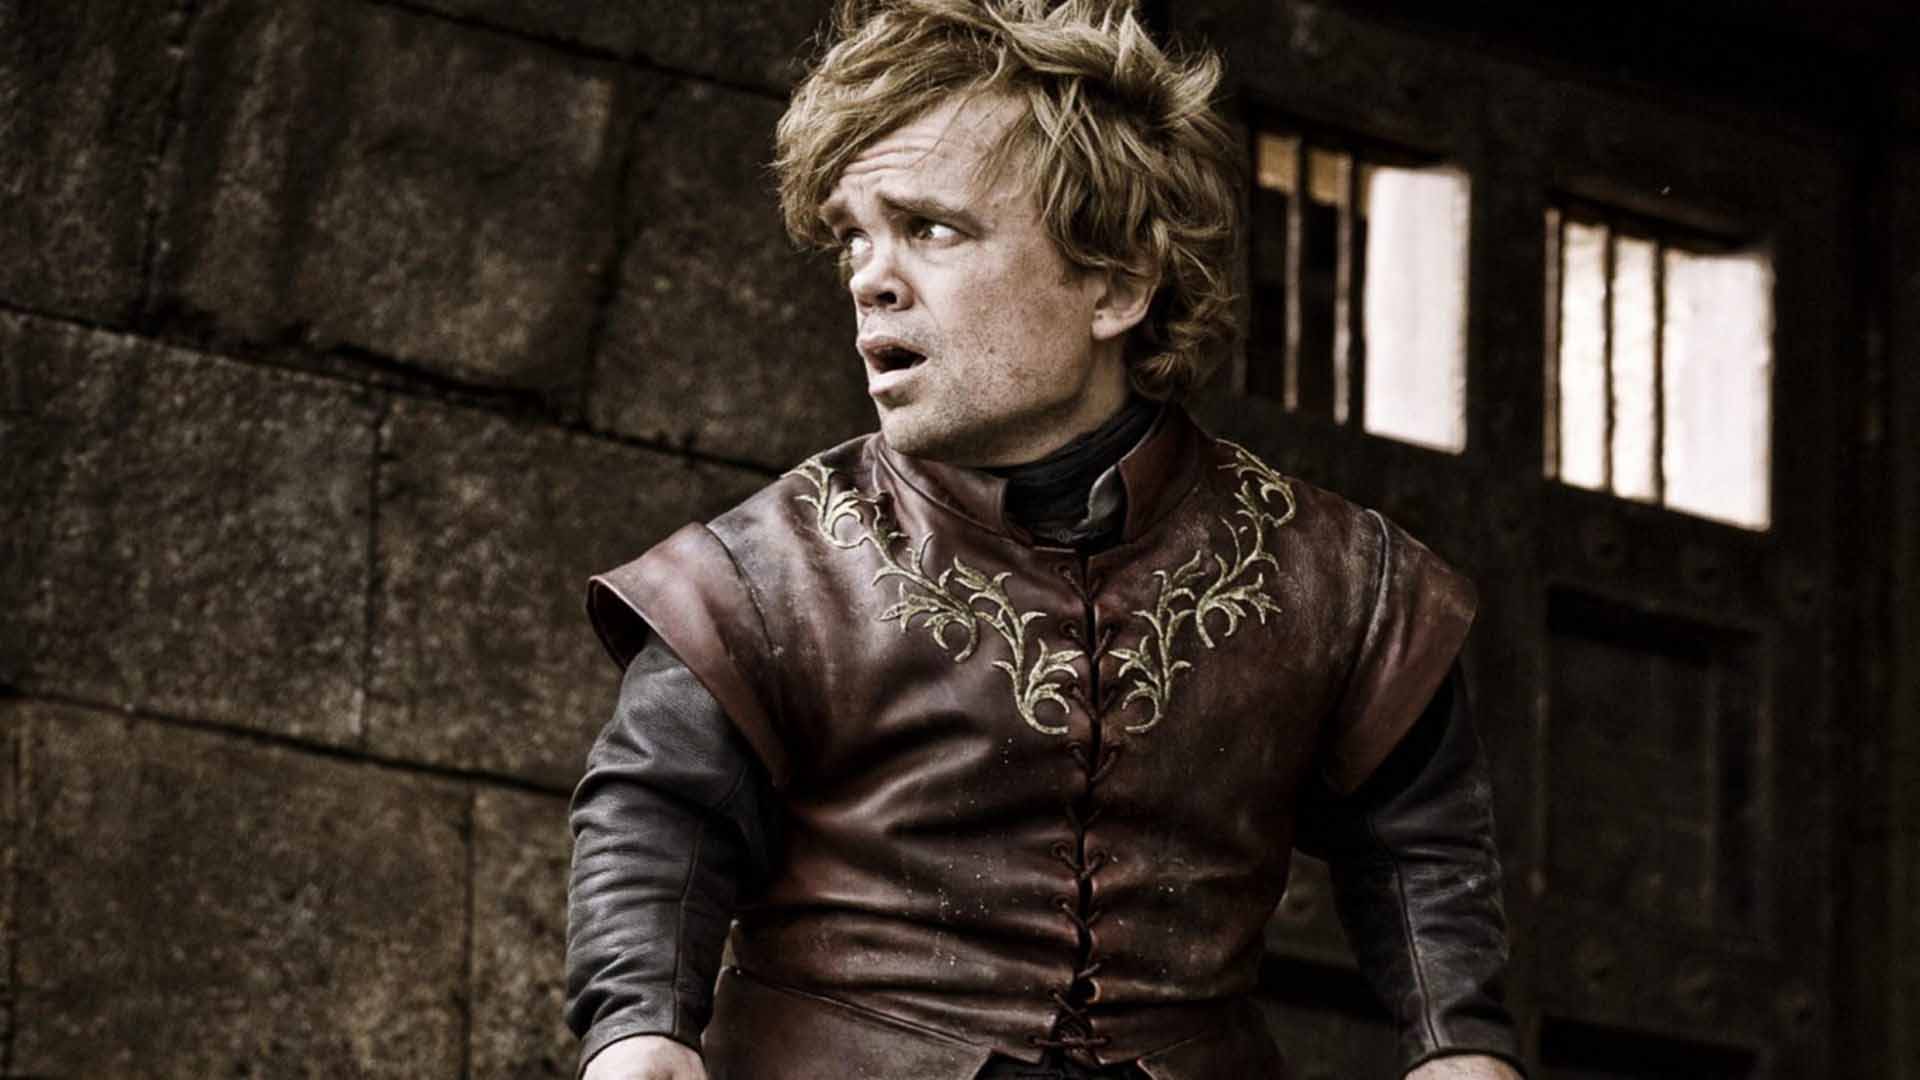 Tyrion Lannister also known as "The Imp" - an antihero of the series that many fans love. Assange has threatened to reveal the future of this character.